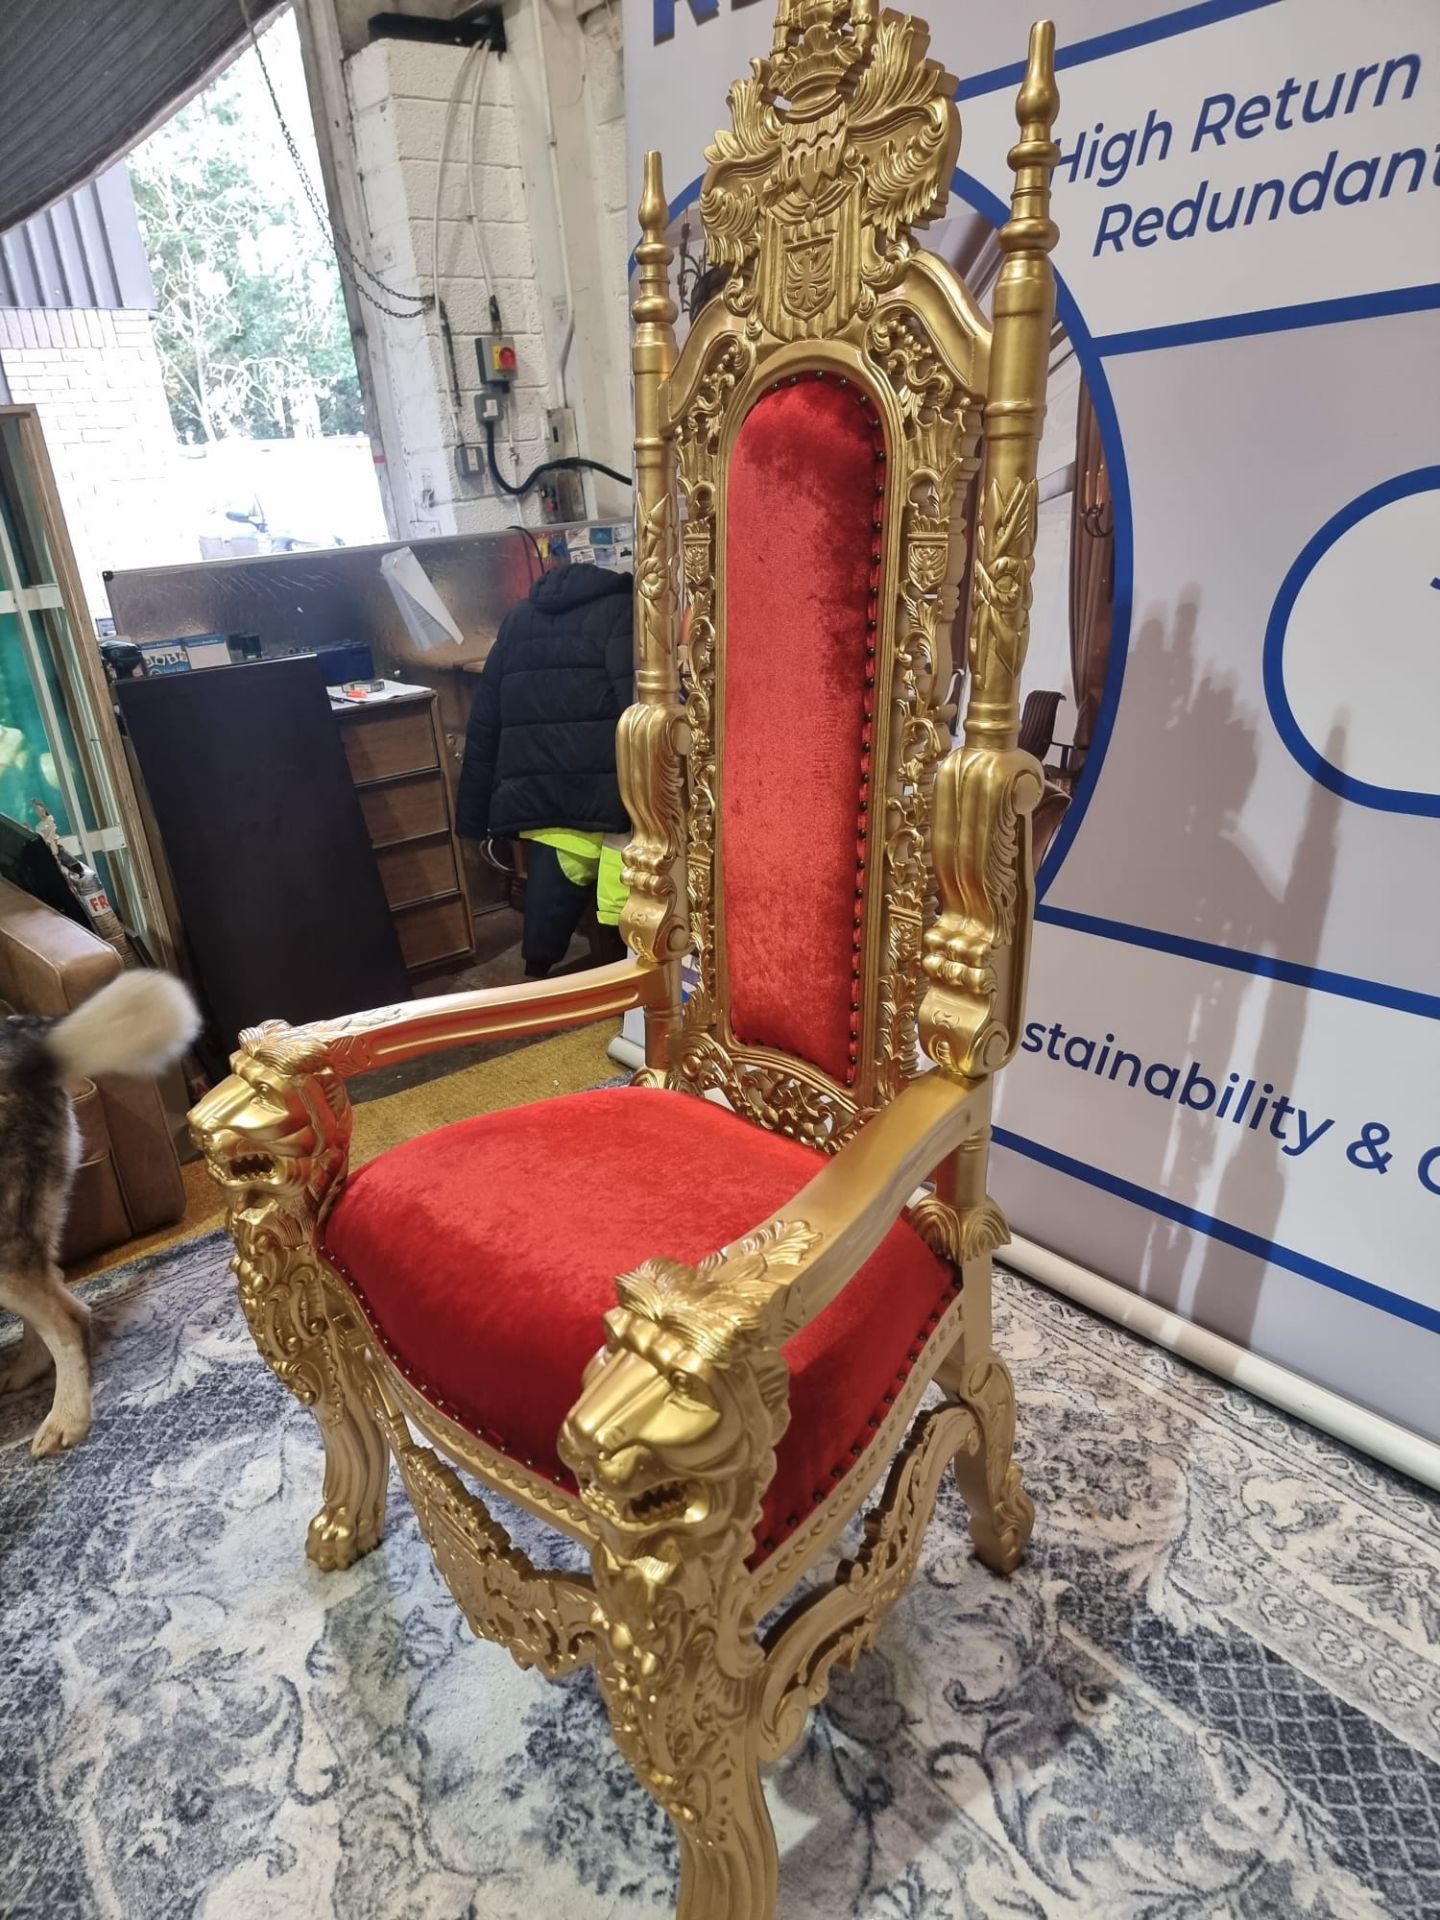 Handmade Mahogany Wood Painted Matt Gold Throne Chair Upholstered In A Pinned Red Velvet Exceptional - Image 2 of 18